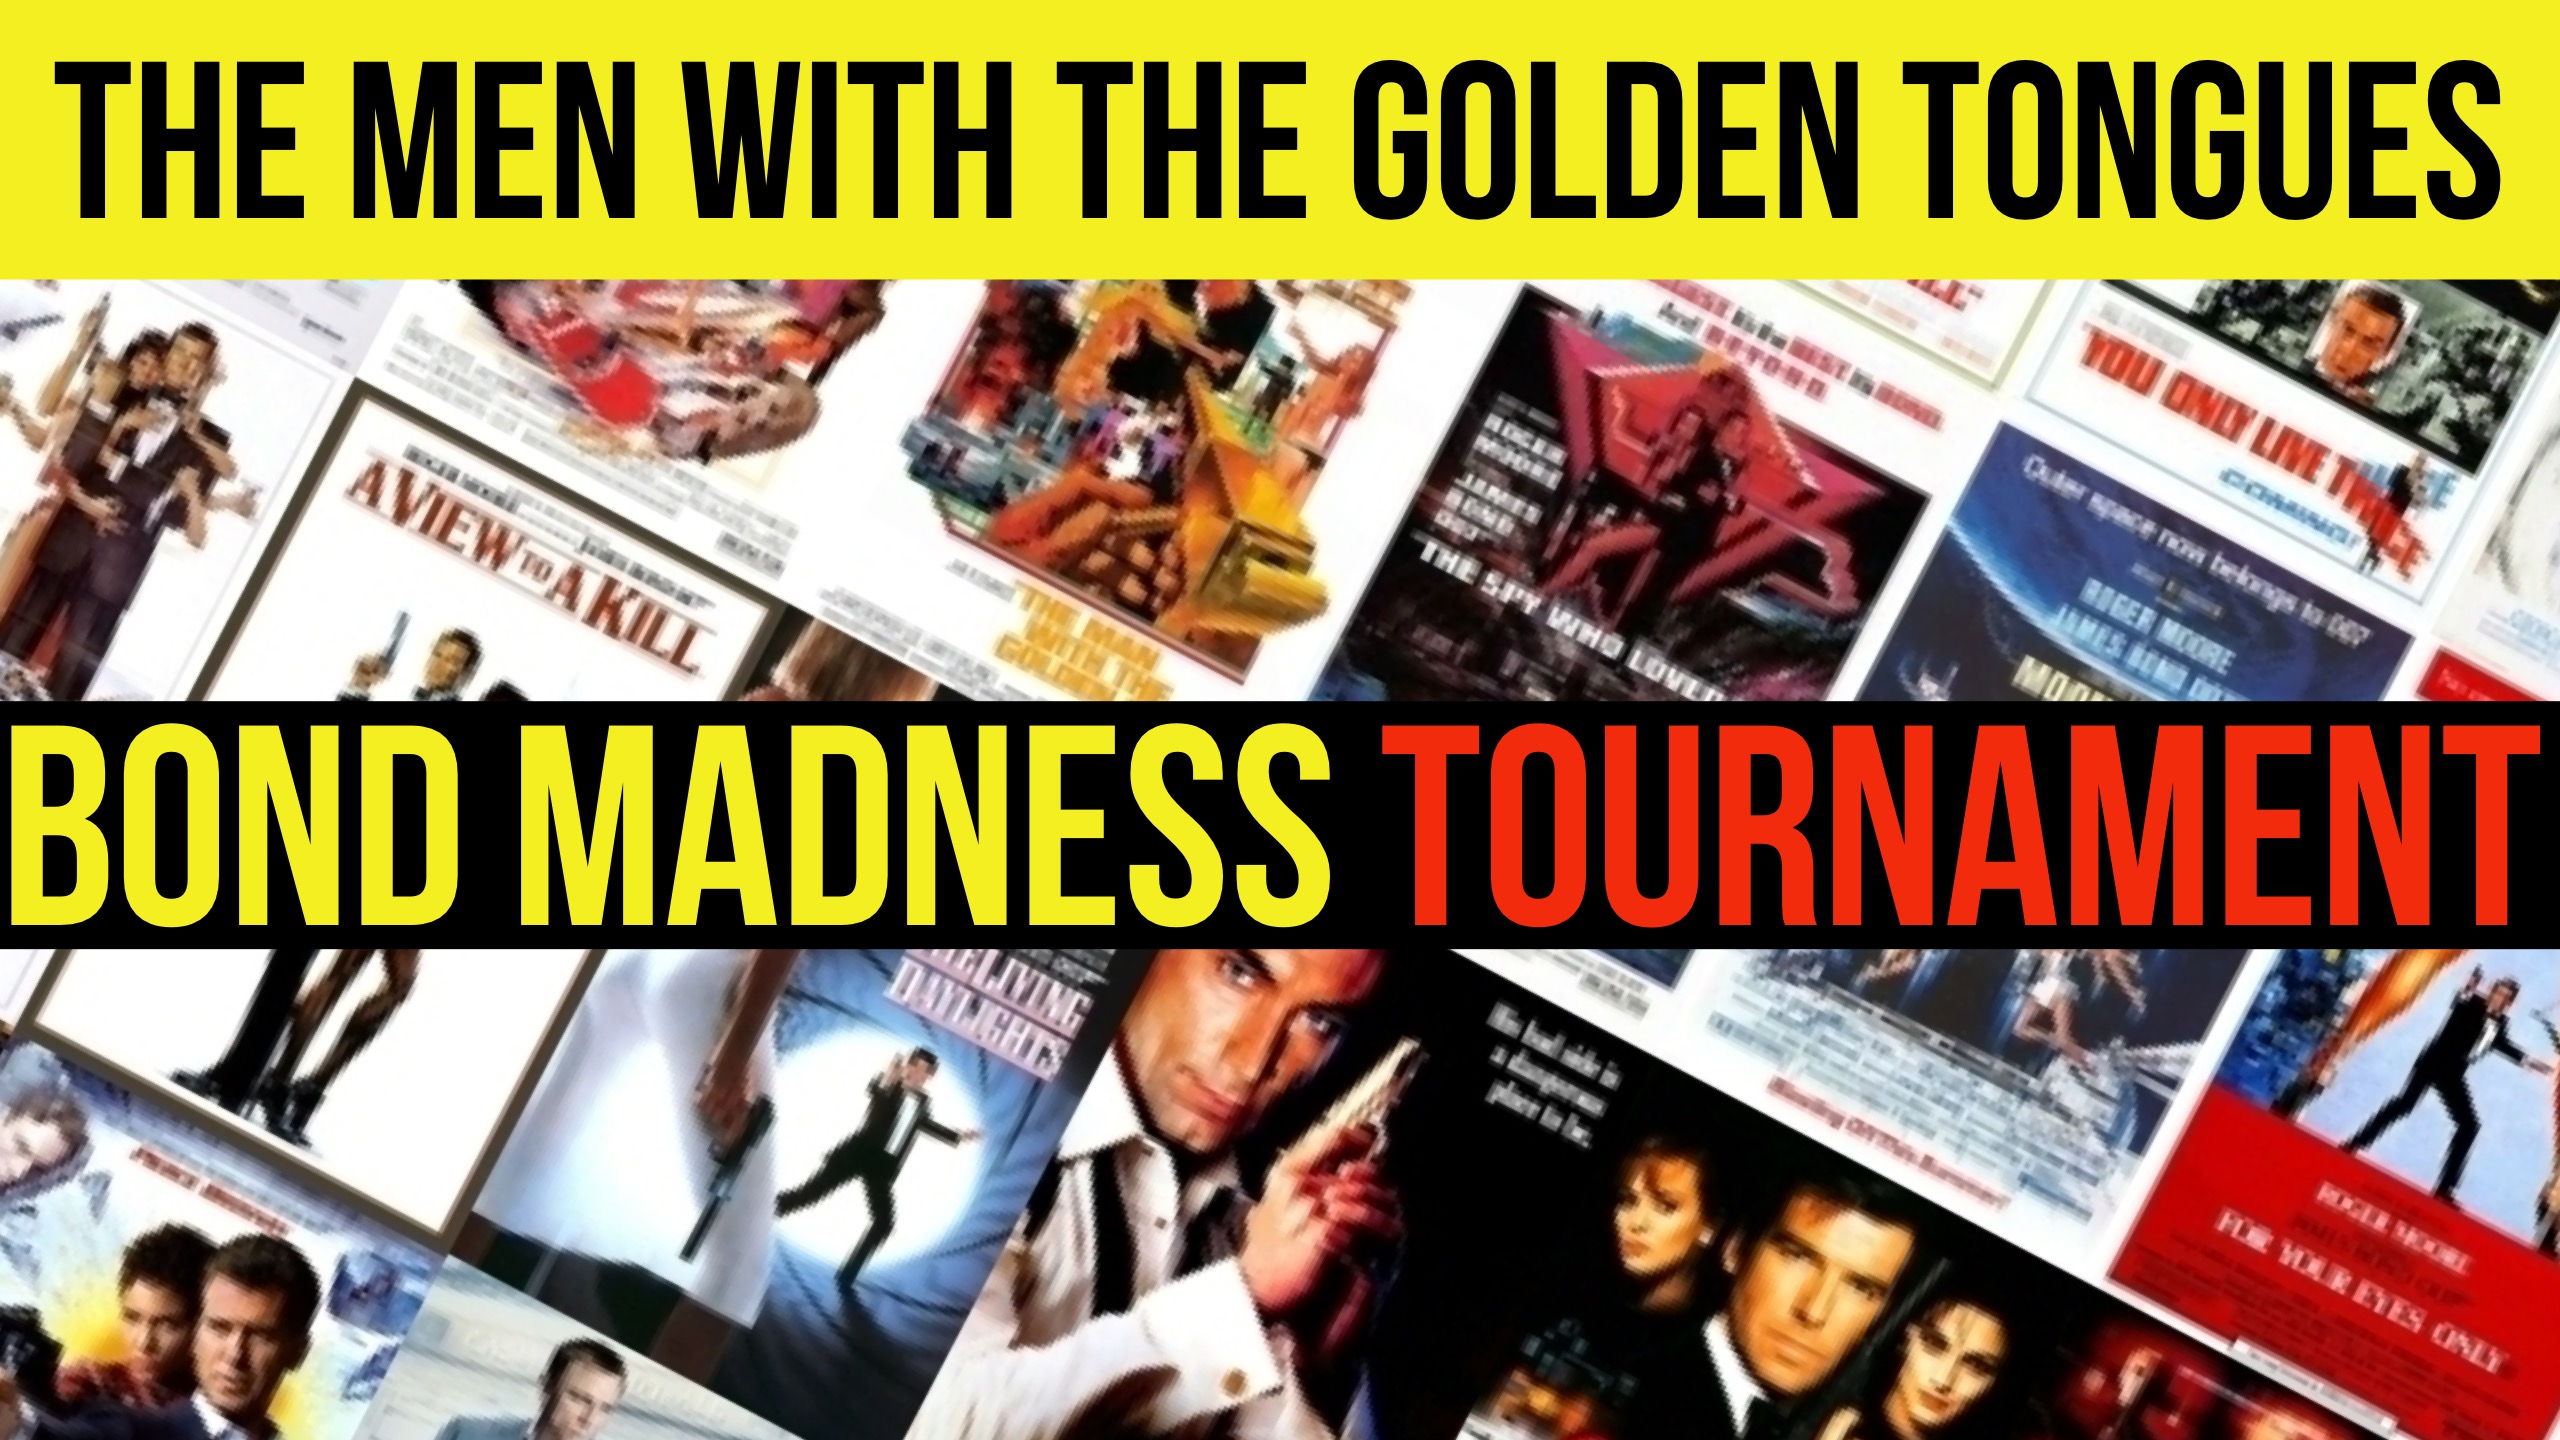 Bond Madness Tournament! - The Men with the Golden Tongues